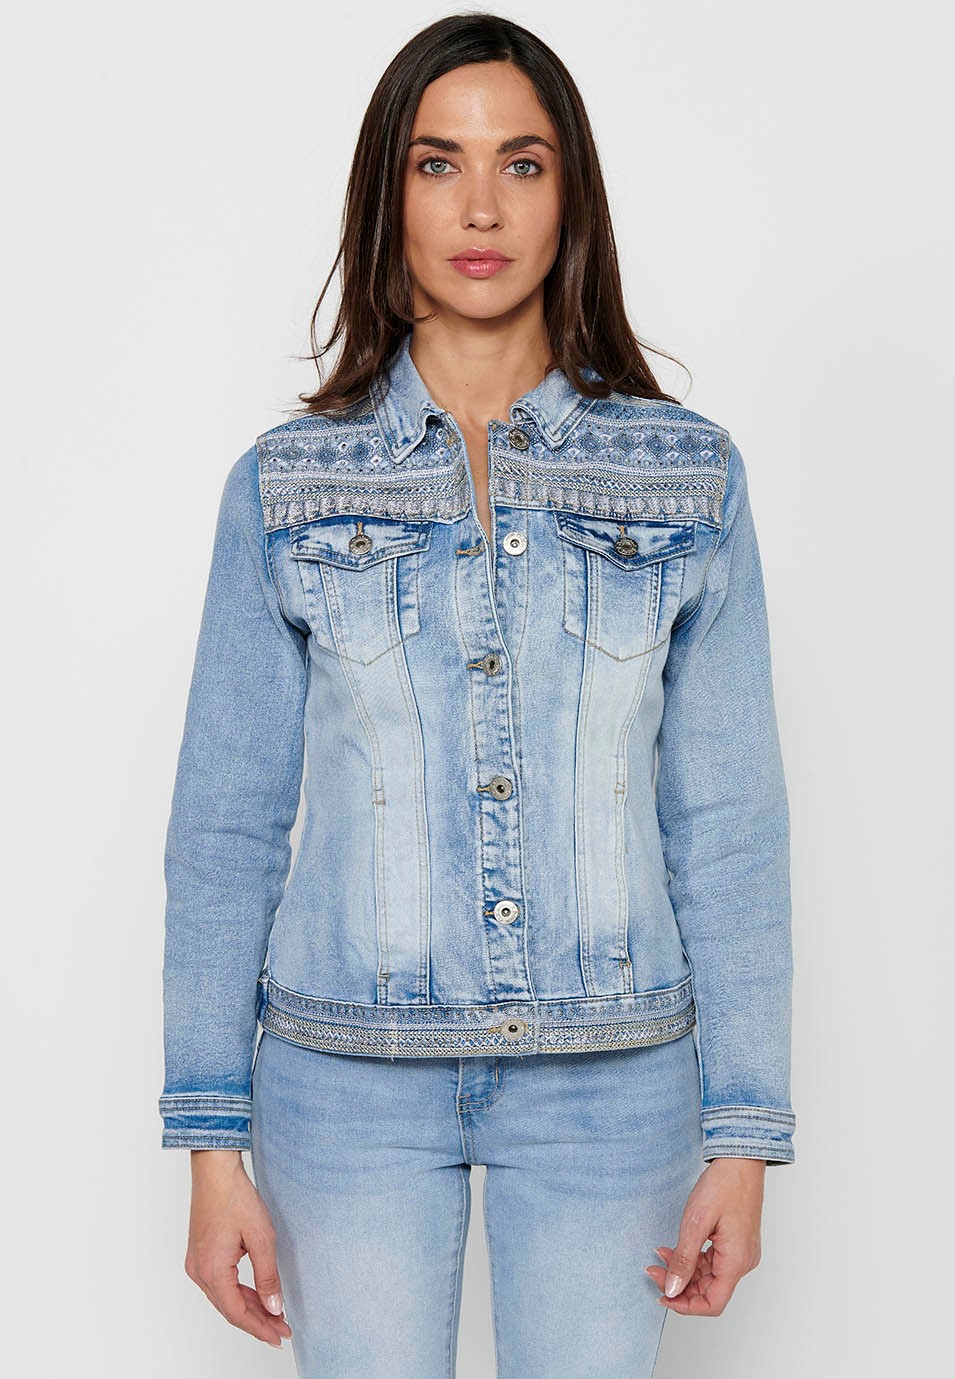 Denim jacket with front closure with buttons and shirt collar with pockets and embroidered details in light blue for women 8